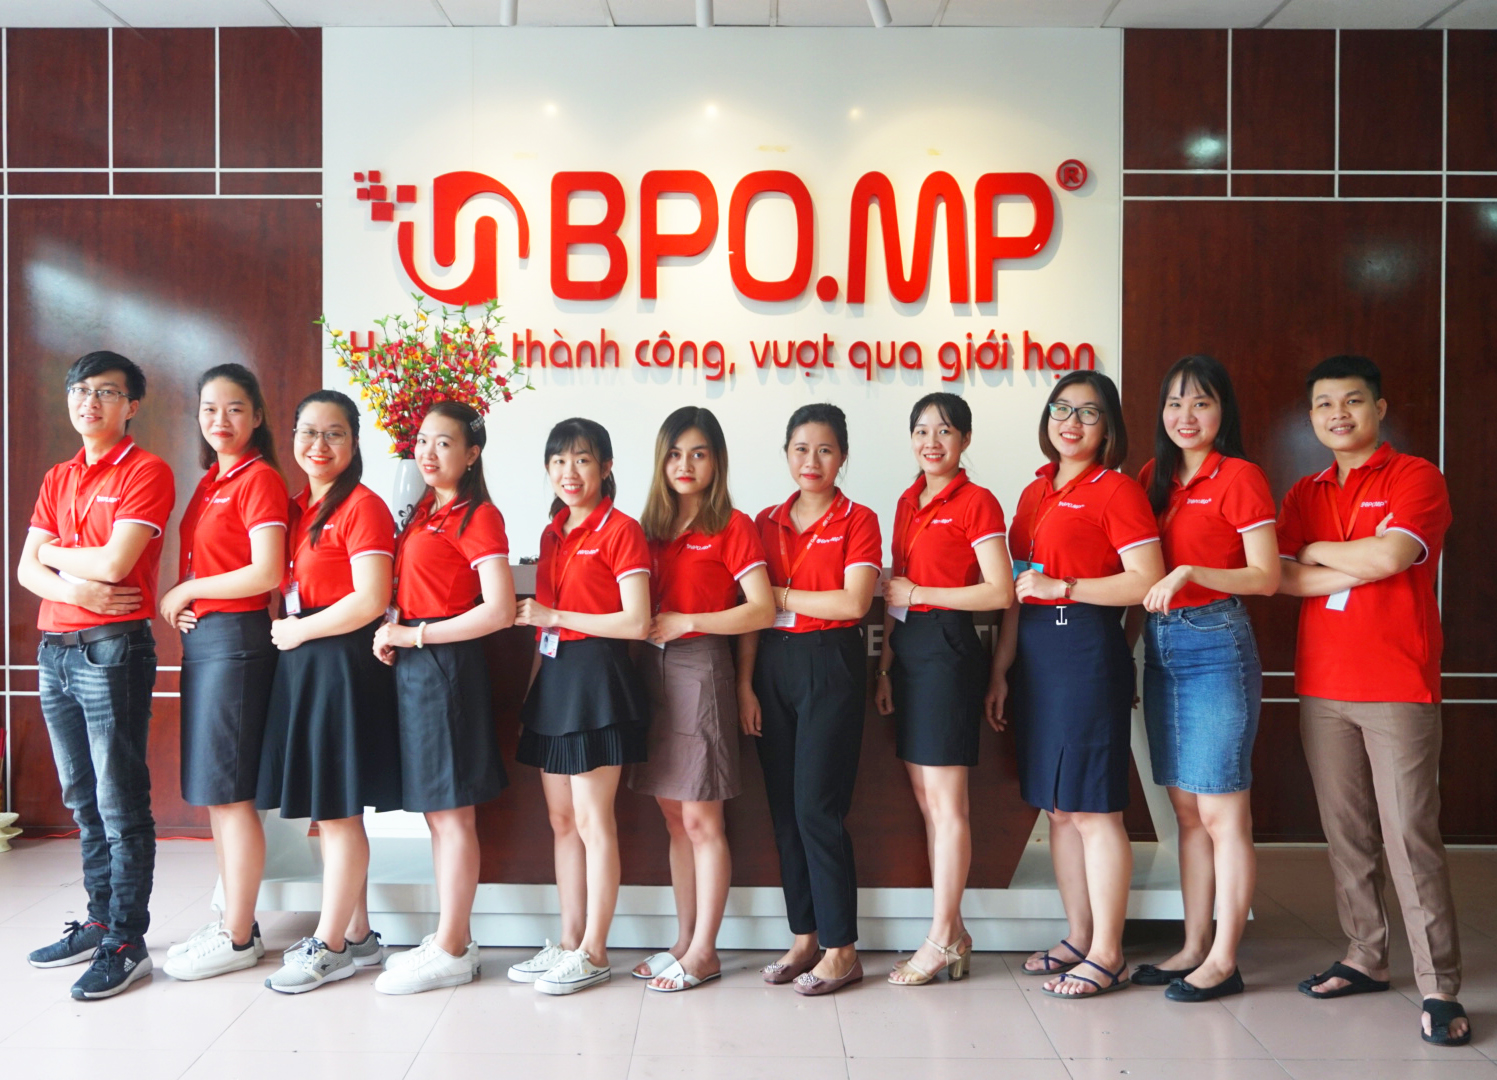 Business Process Outsourcing BPO.MP